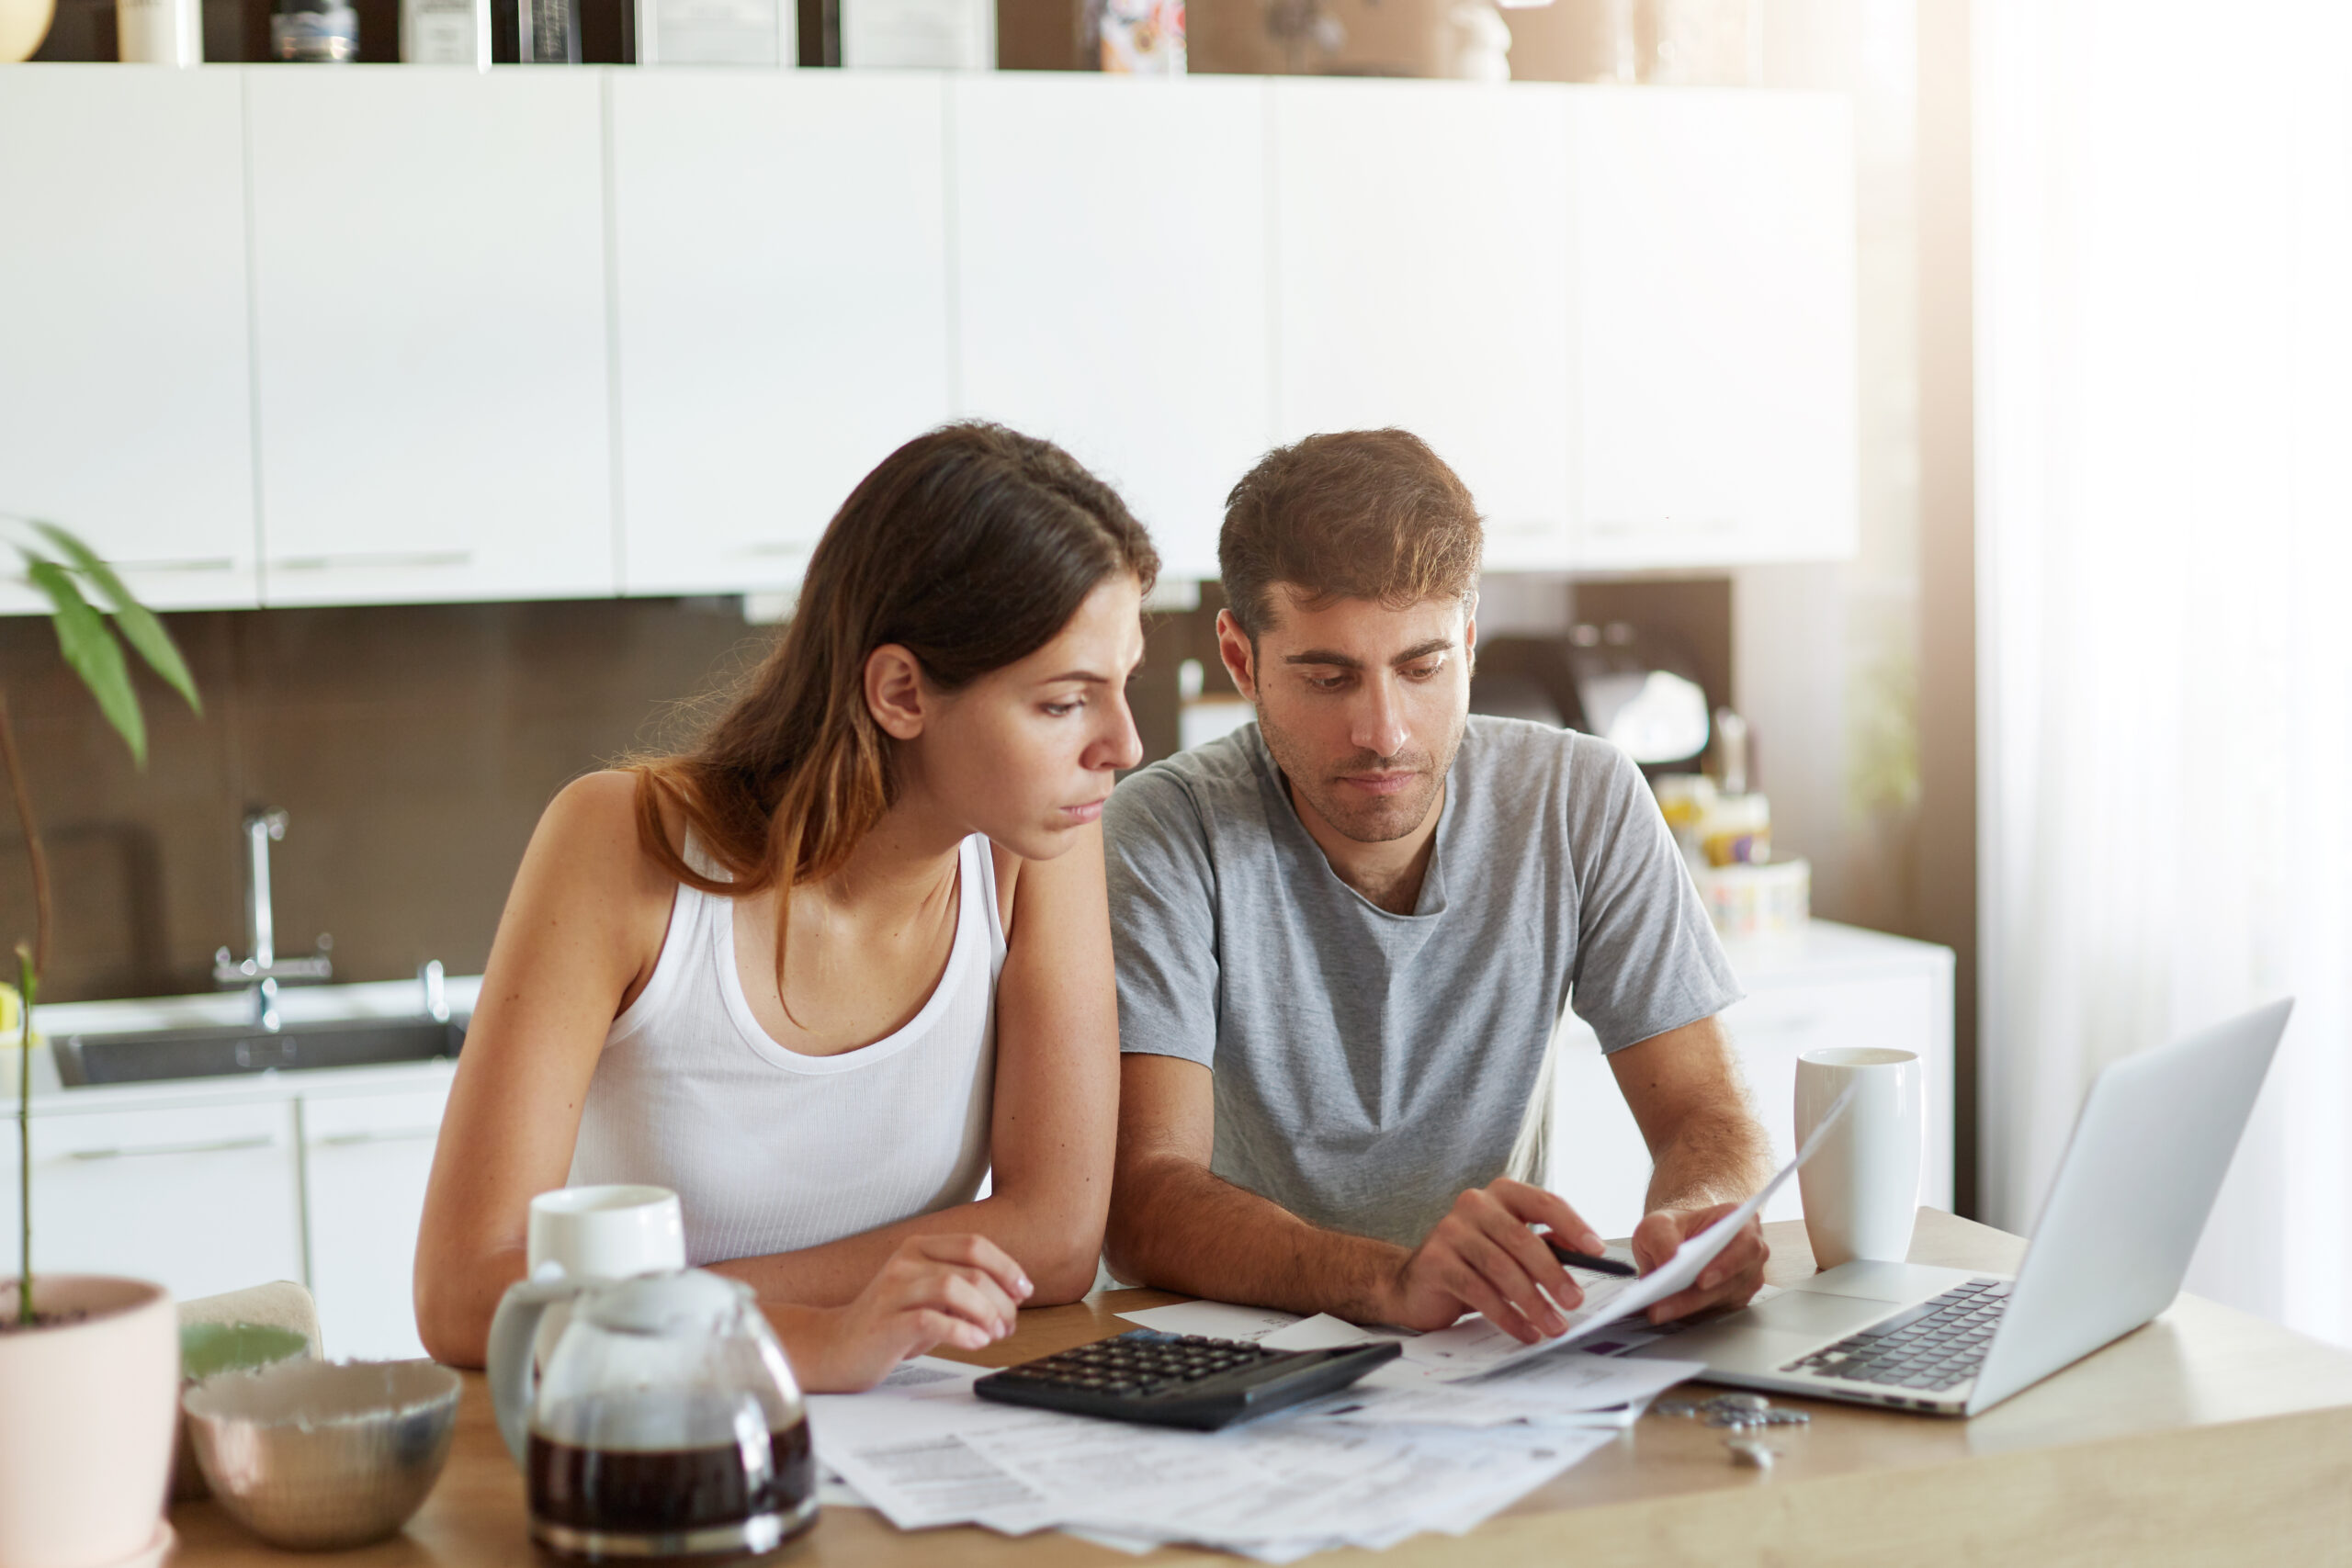 Portrait of serious man and female sitting at kitchen table, dealing with financial issues, holding documents. Family couple calculating their debts while sitting together at kitchen. Business concept